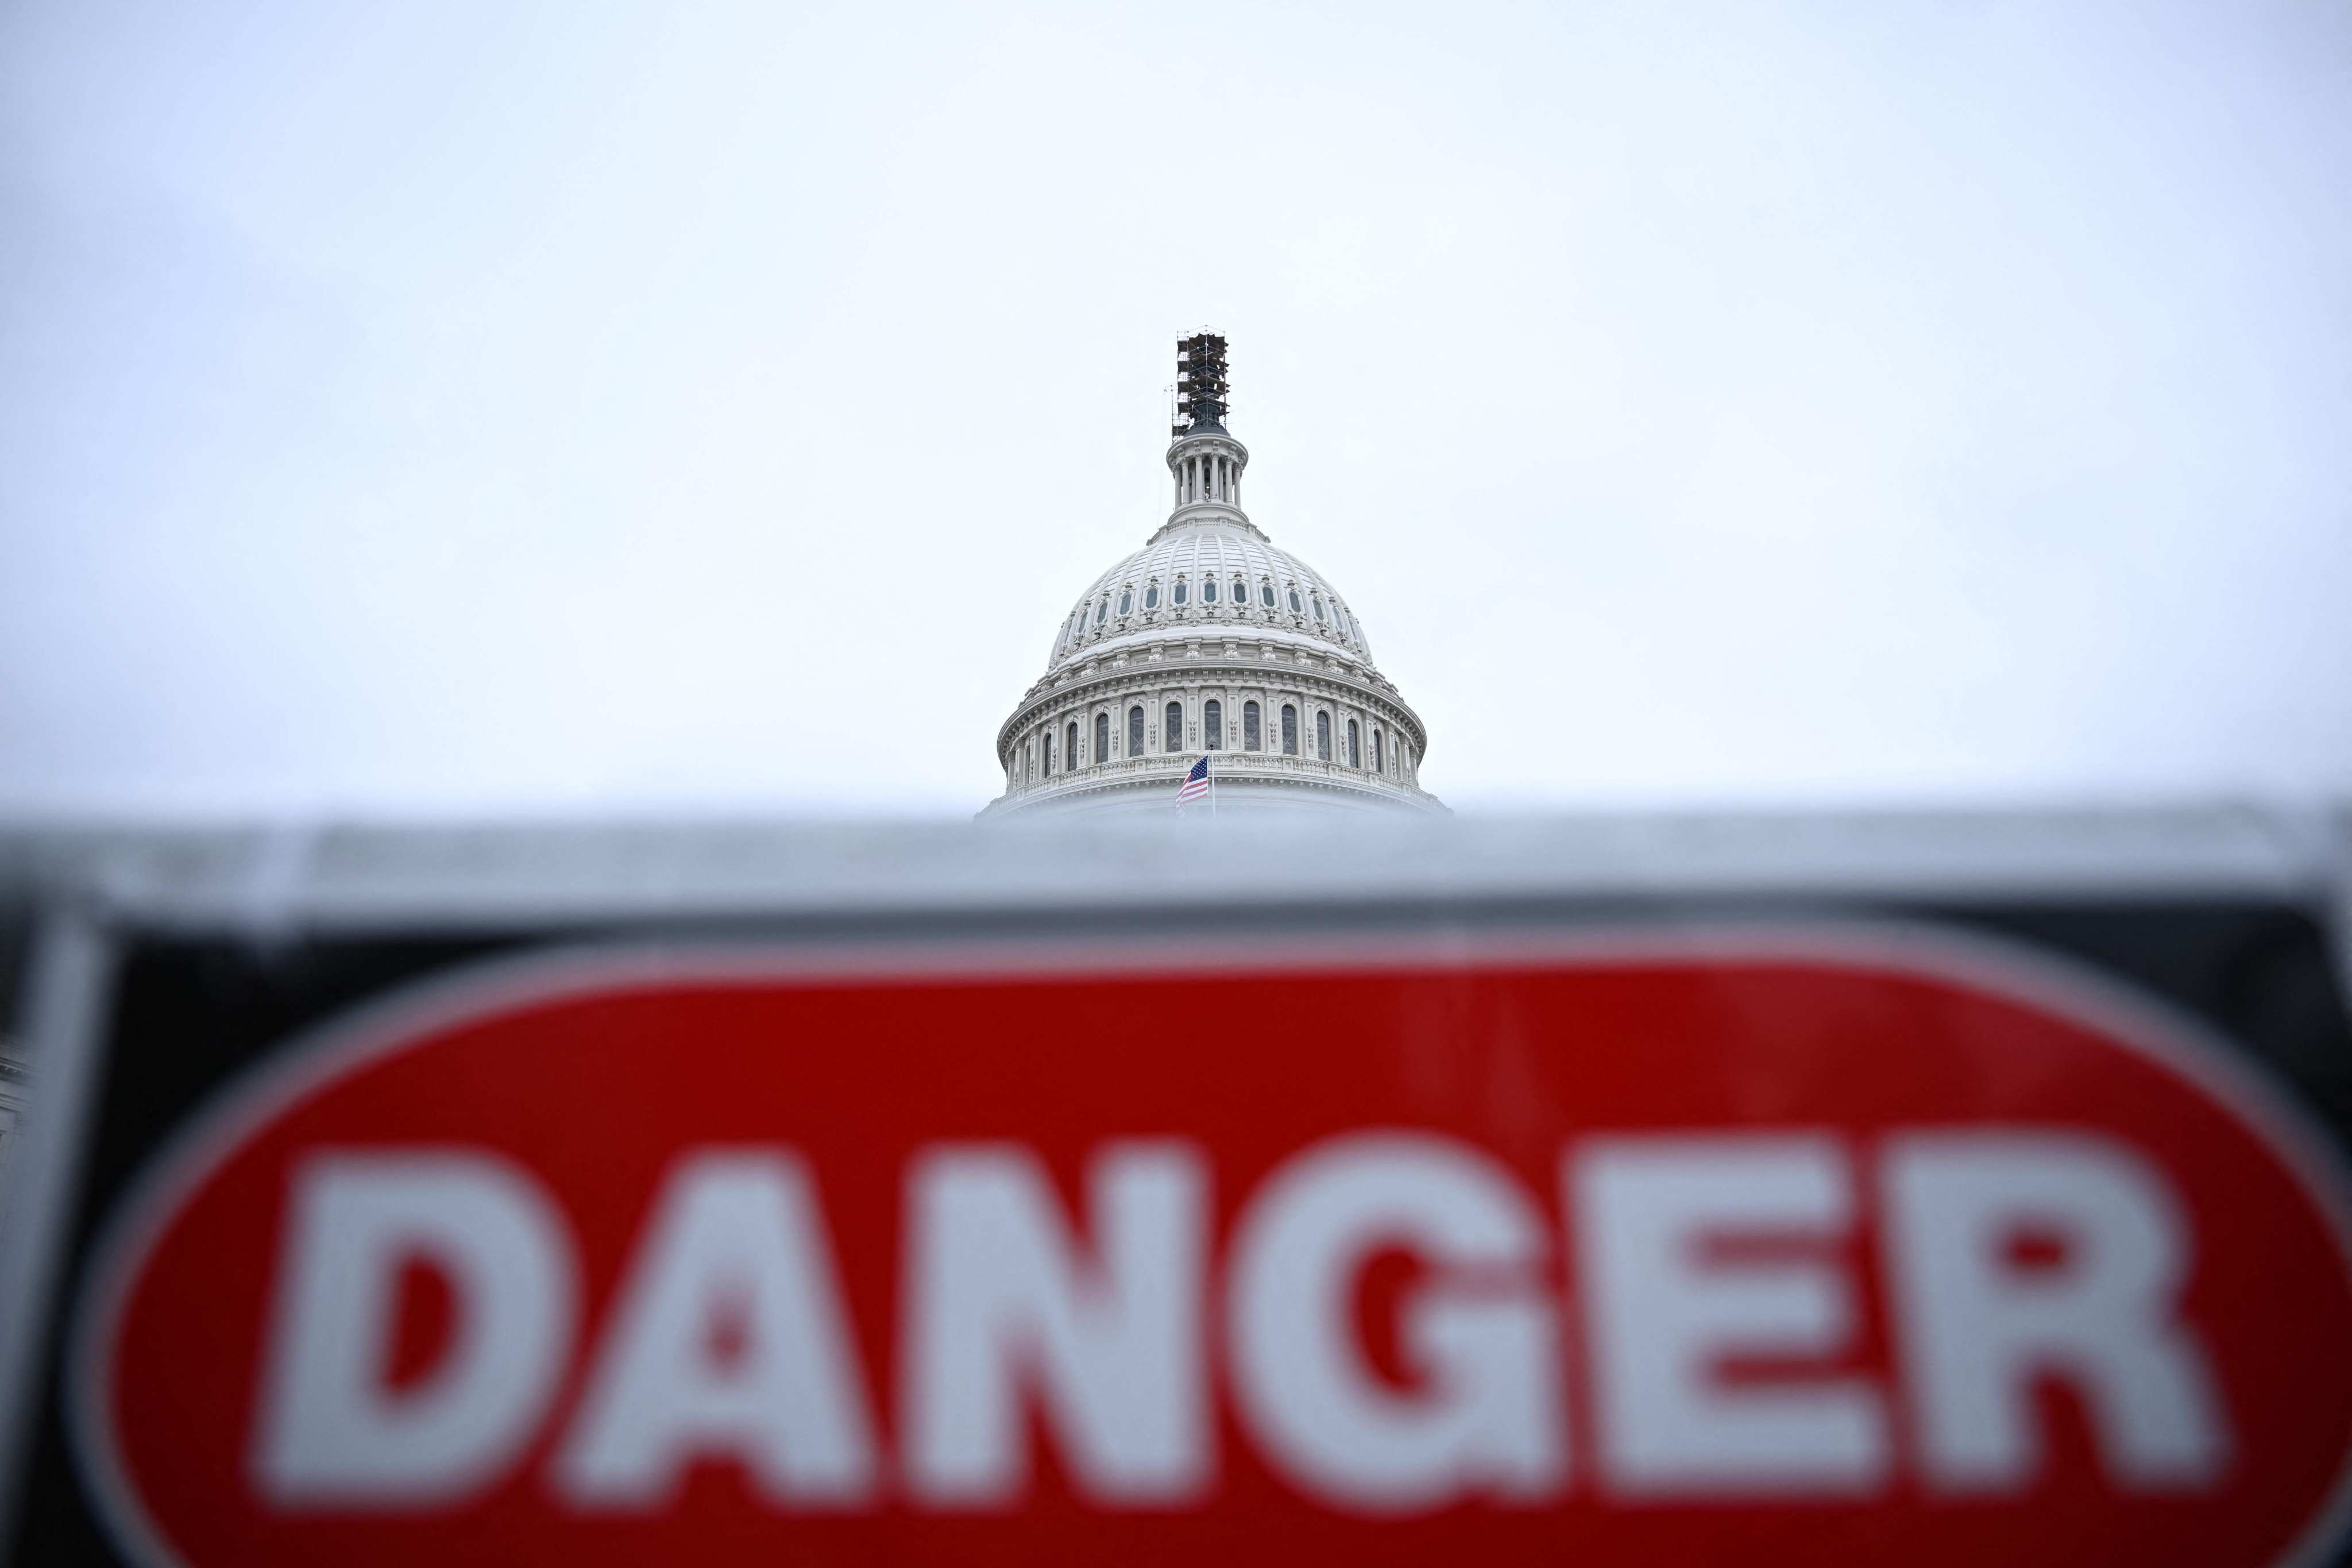 The US Capitol in Washington on September 26. A tendency to downplay the fiscal and political problems in America has contributed to complacency about the US economic outlook. Photo: AFP